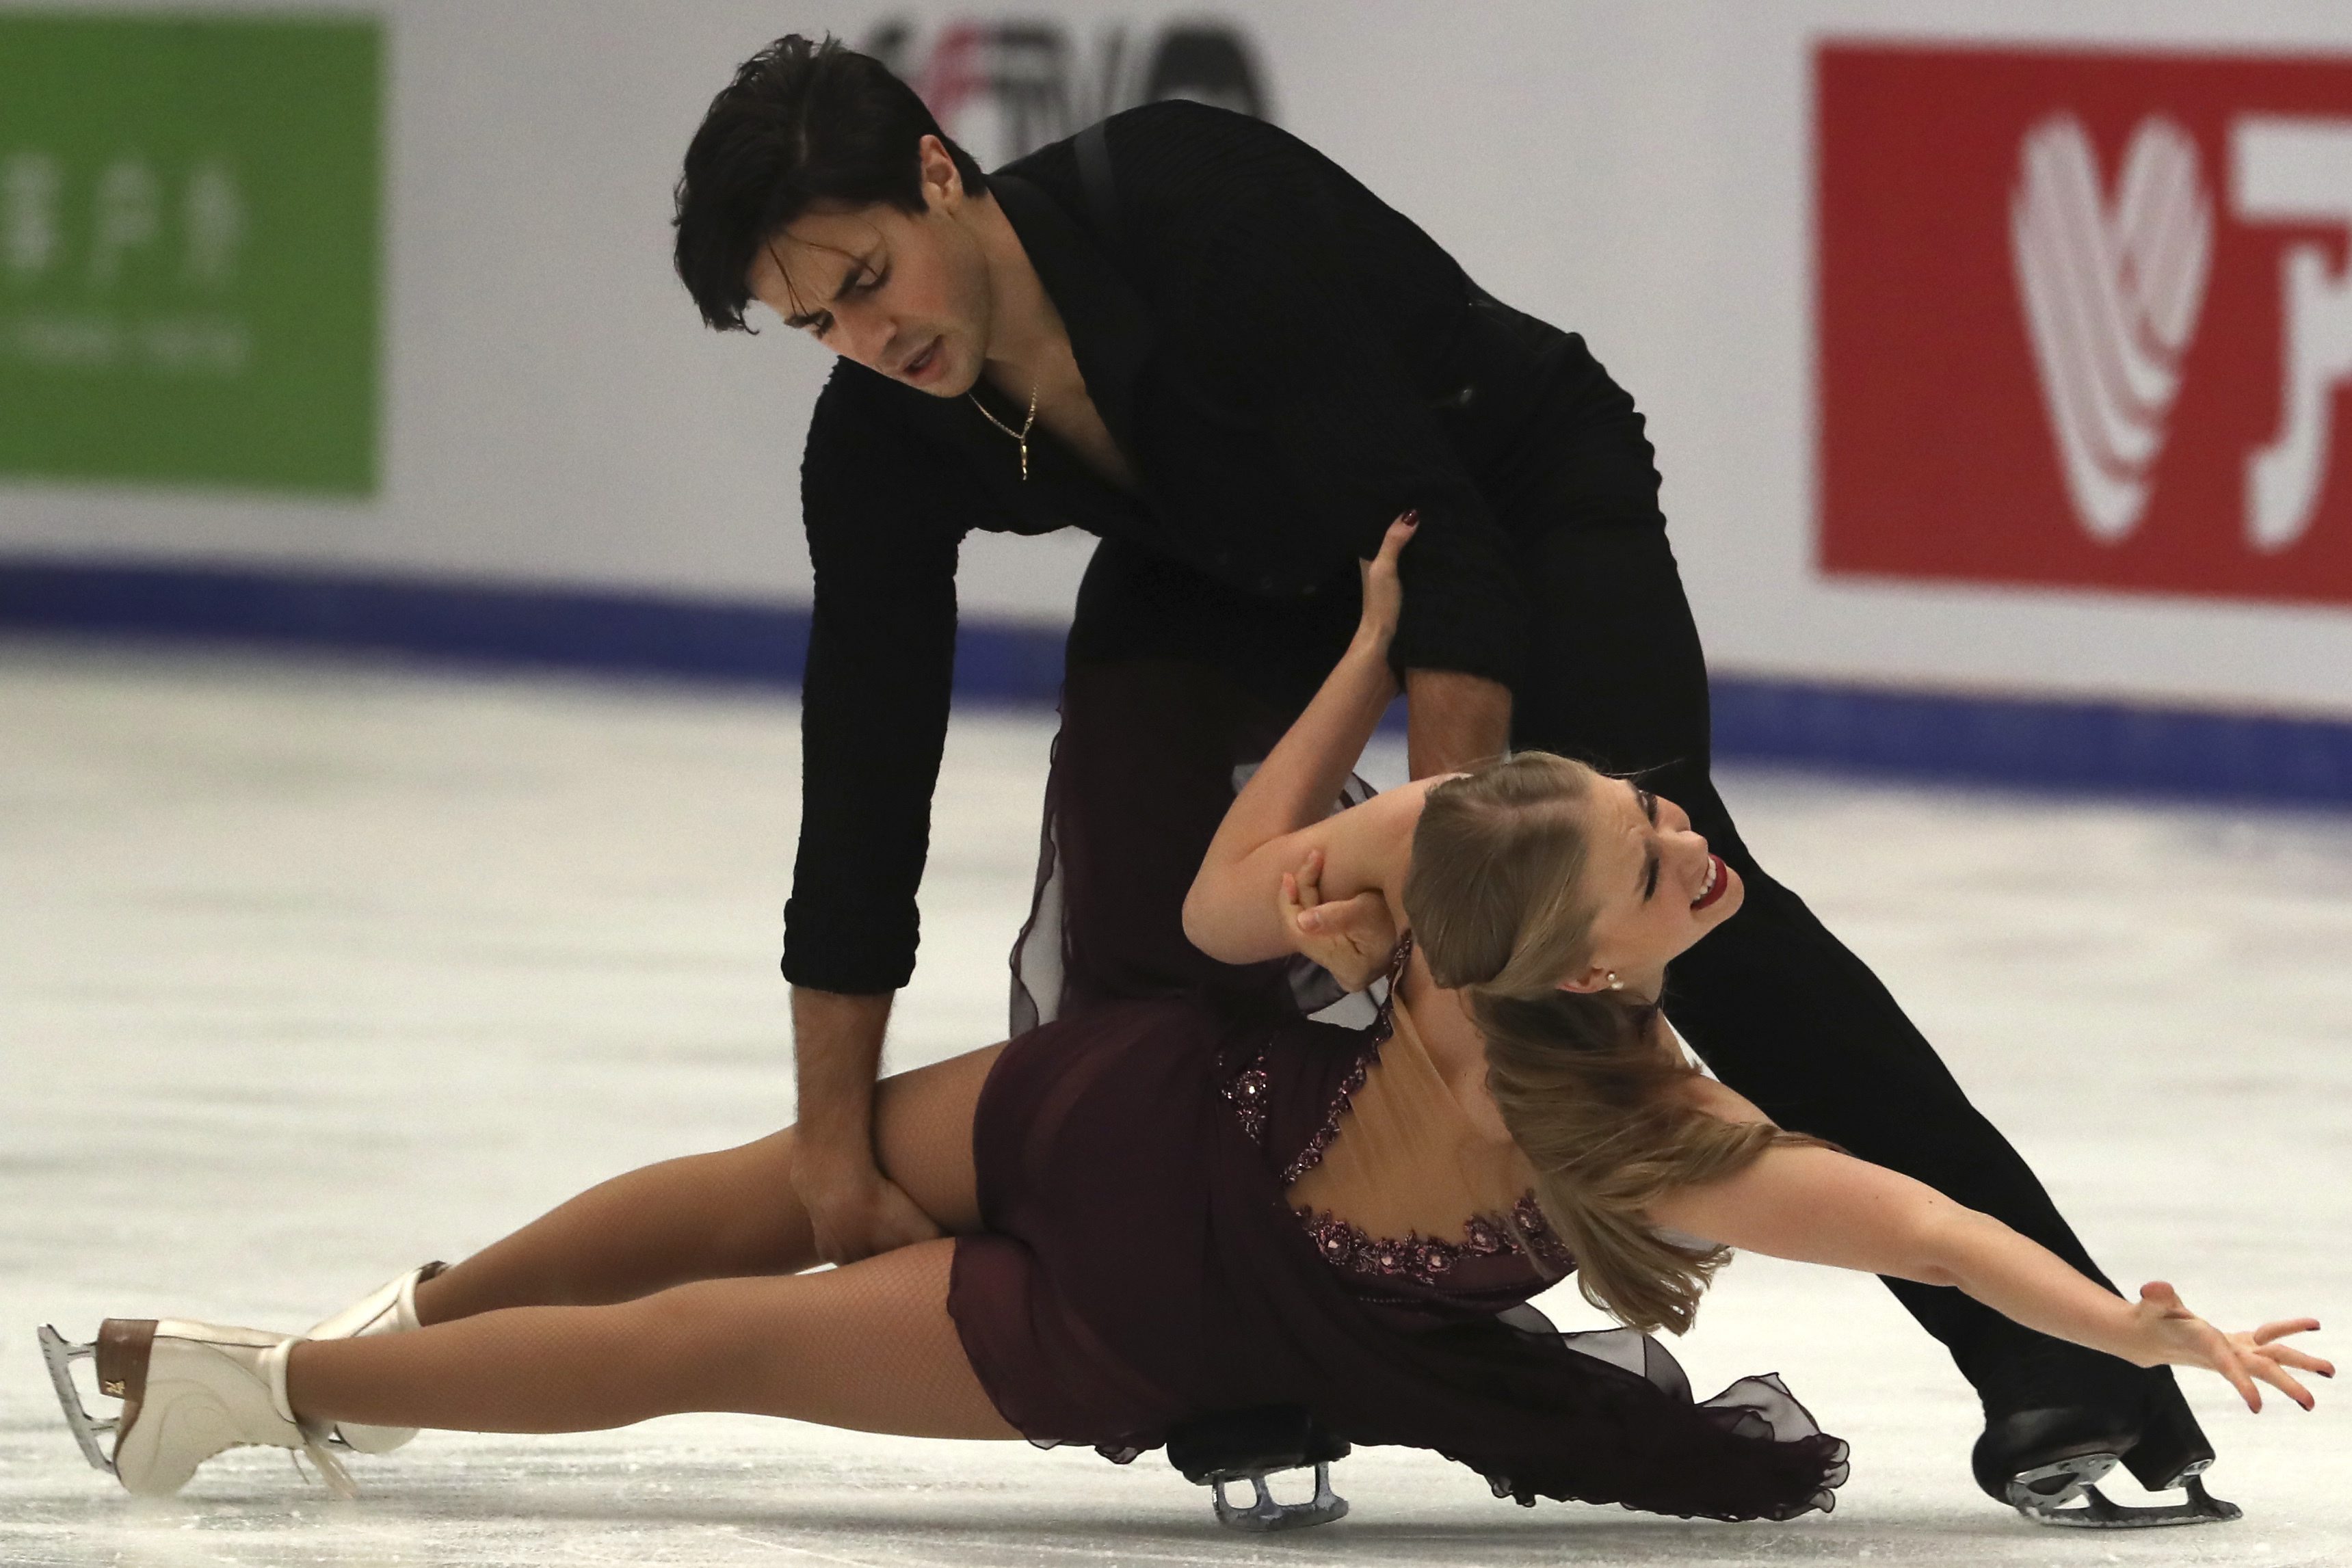 Kaitlyn Weaver and Andrew Poje of Canada compete in the Ice Dance Free Dance of the Audi Cup of China ISU Grand Prix of Figure Skating 2016 held in the Capital Gymnasium in Beijing, China, Saturday, Nov. 19, 2016. (AP Photo/Ng Han Guan)